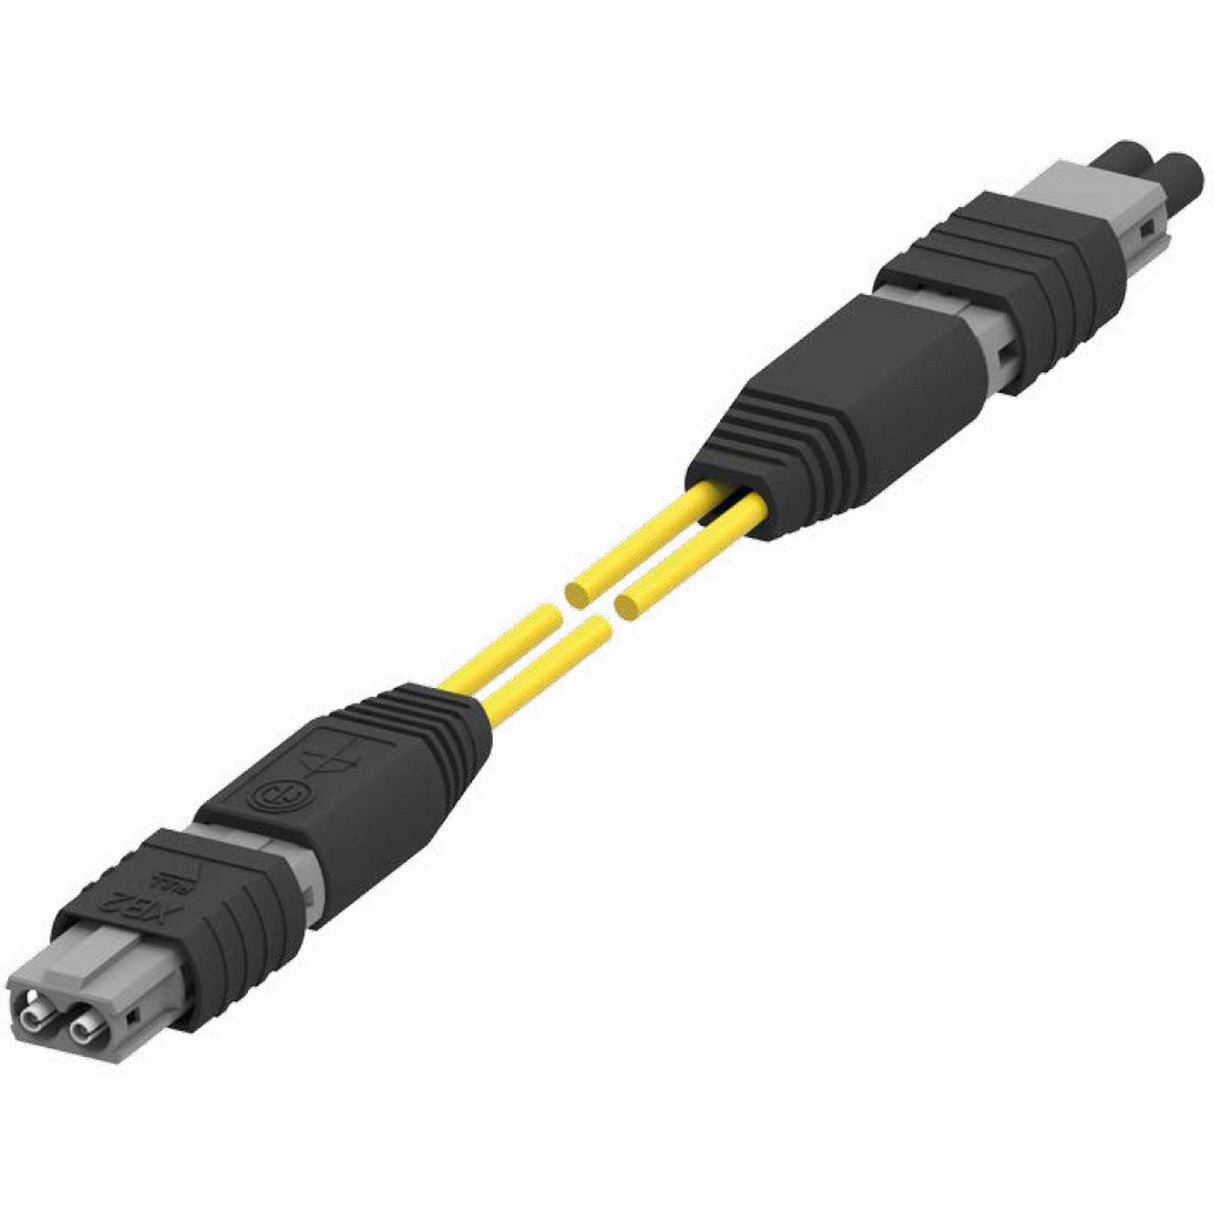 Neutrik NKOP2S-XP-0-20 opticalCON DRAGONFLY XB2 Male to XB2 Female Patch Cable, 20-Meter